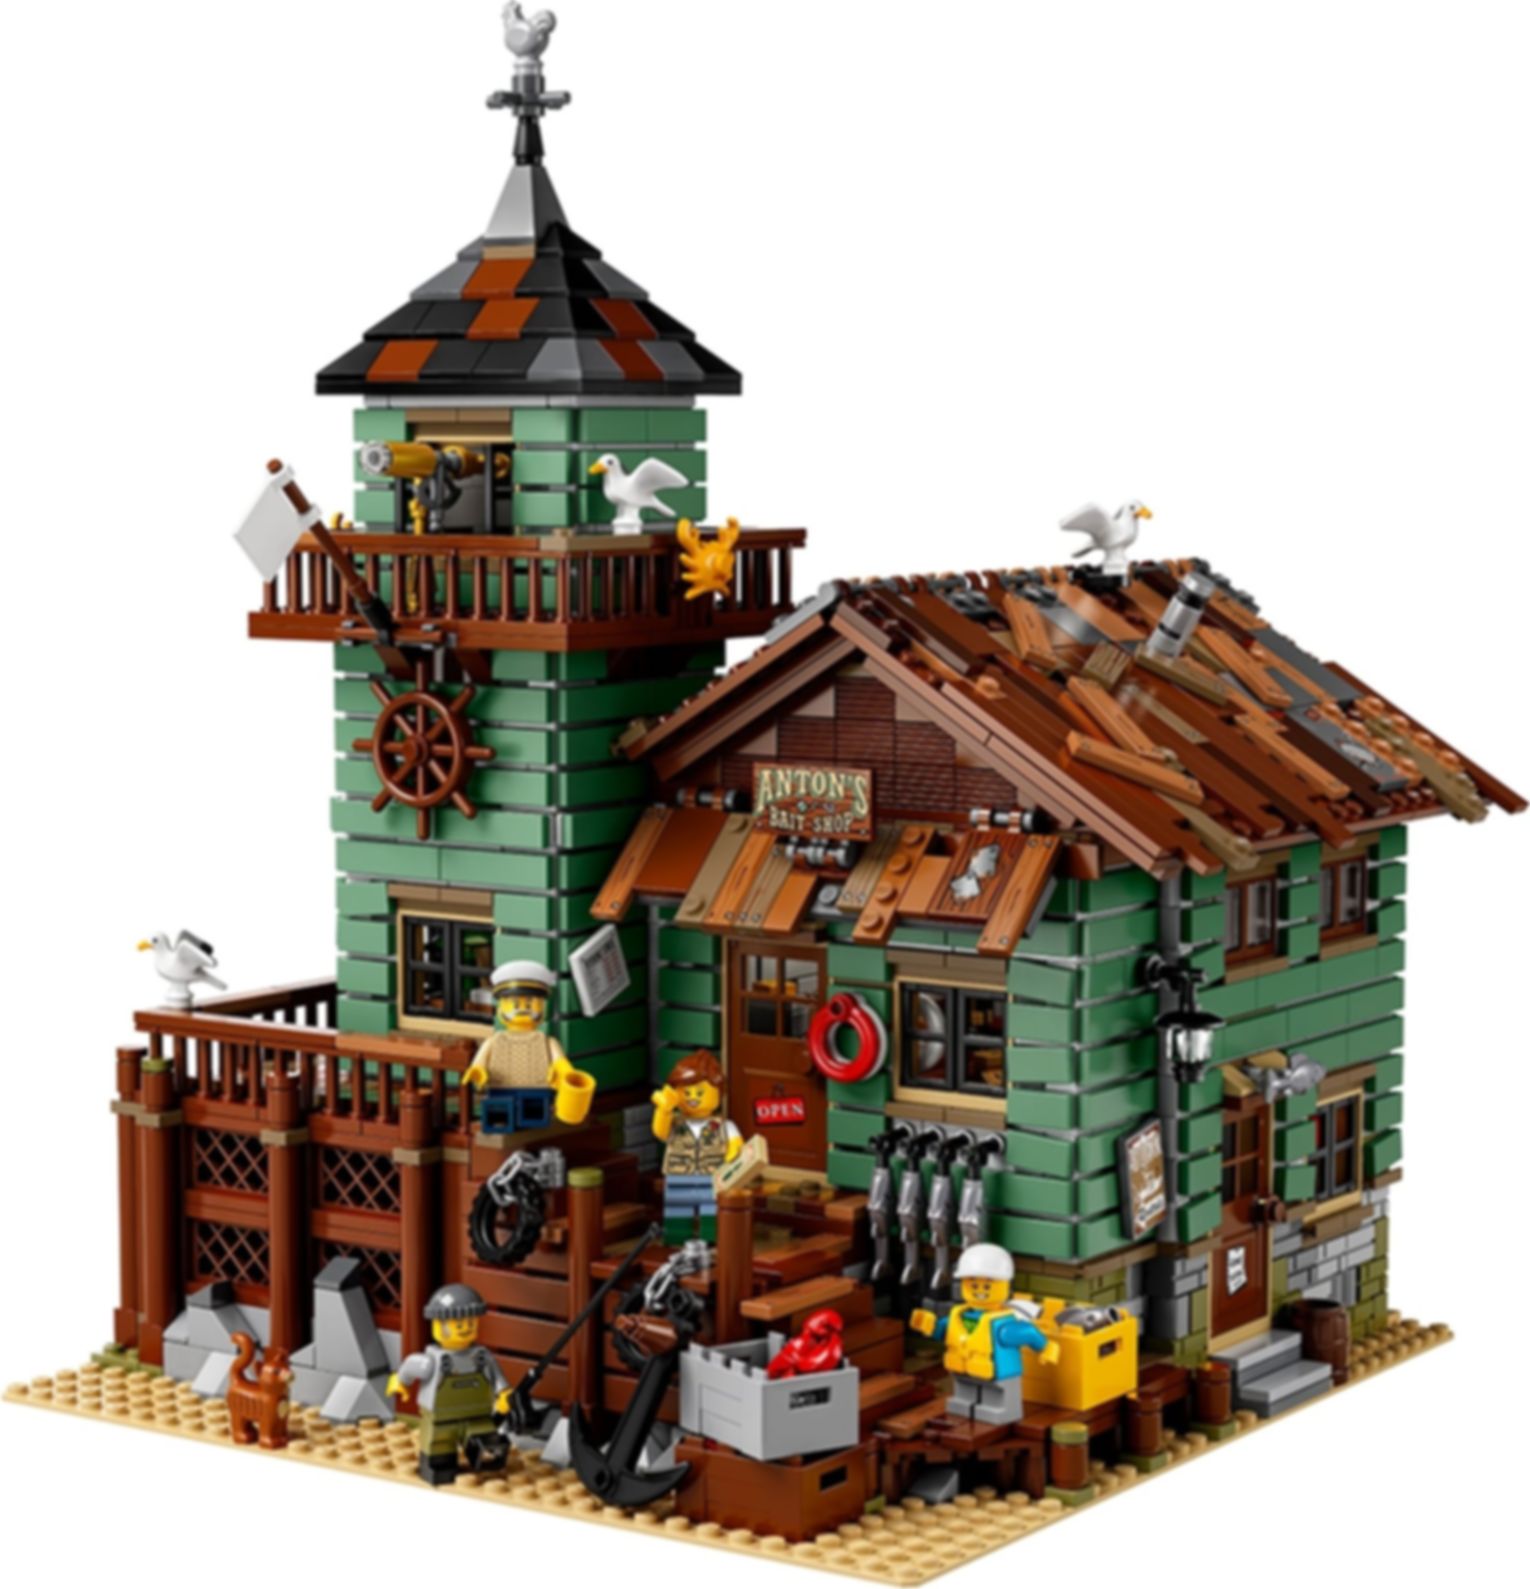 LEGO® Ideas Old Fishing Store